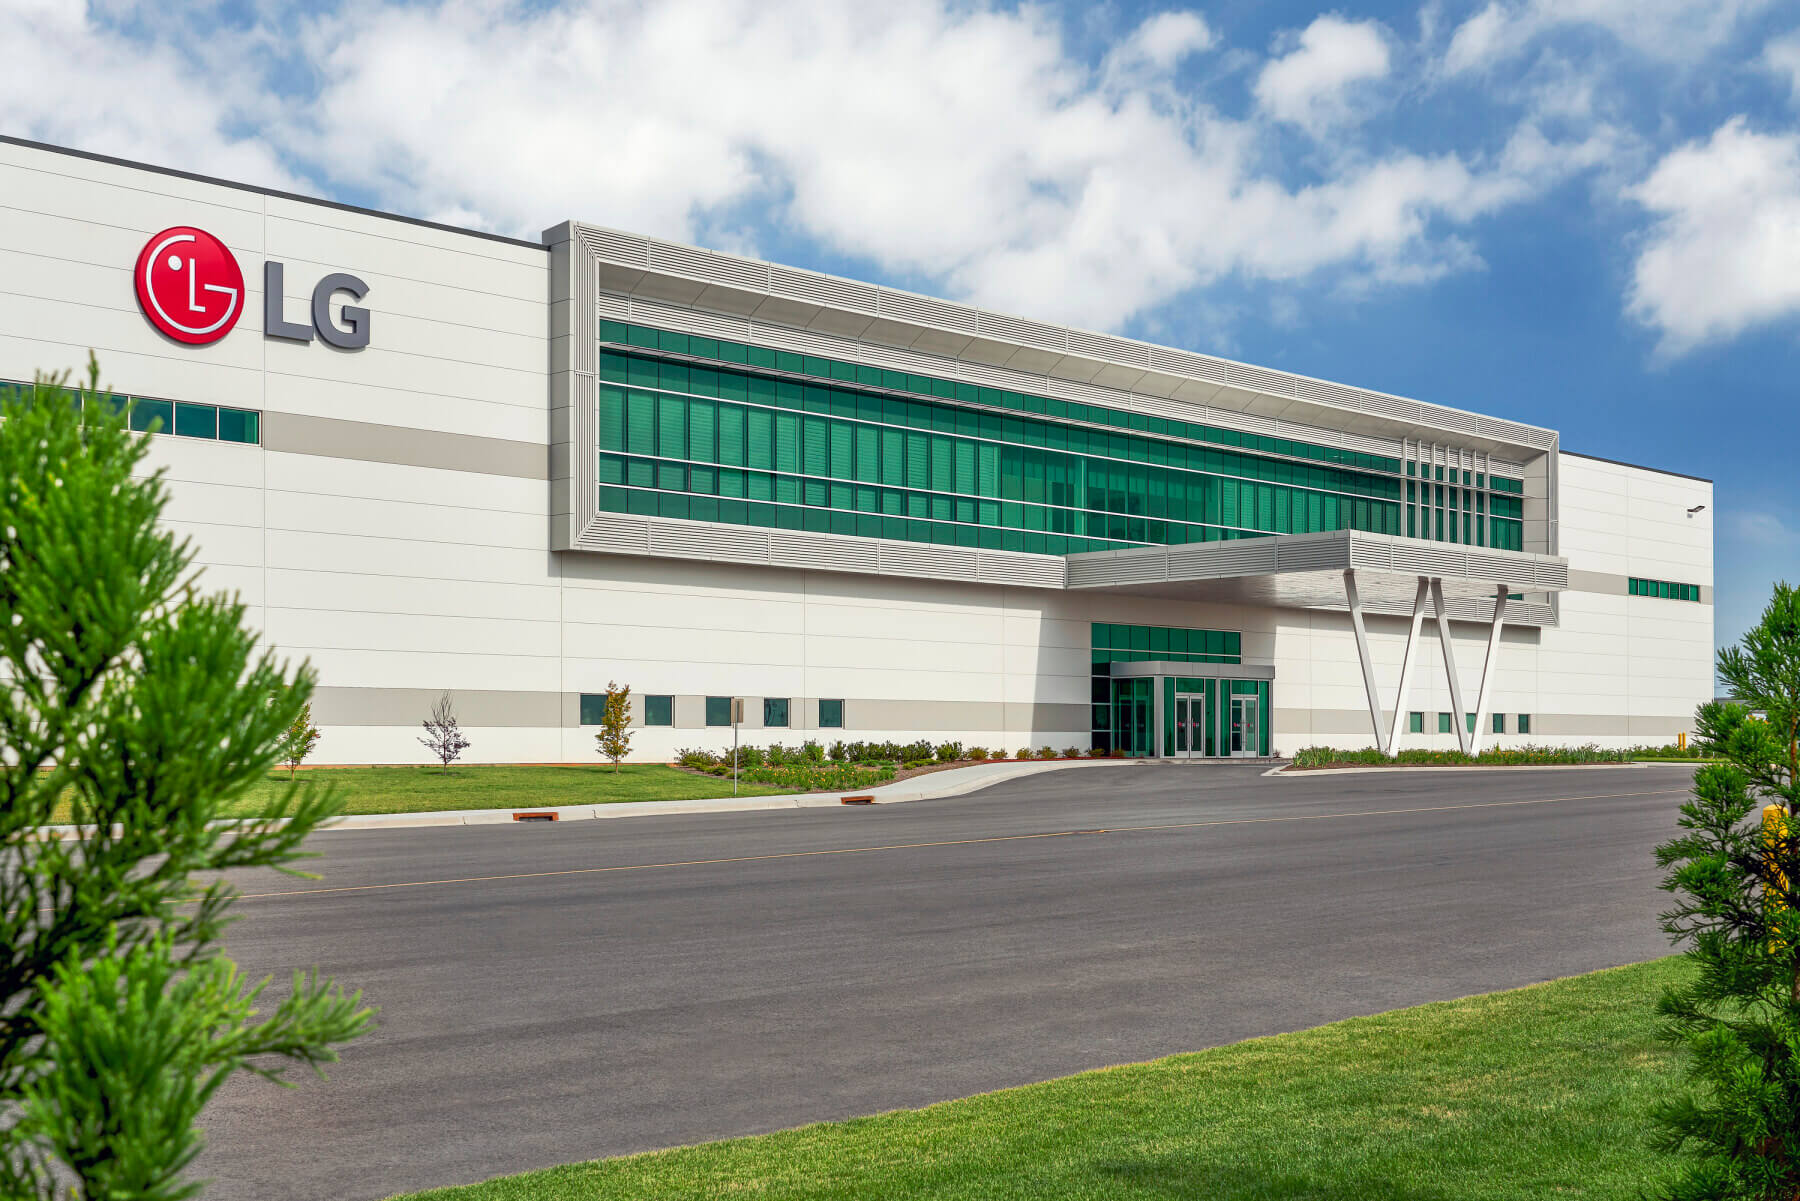 the entrance of the LG Electronics appliance manufacturing plant